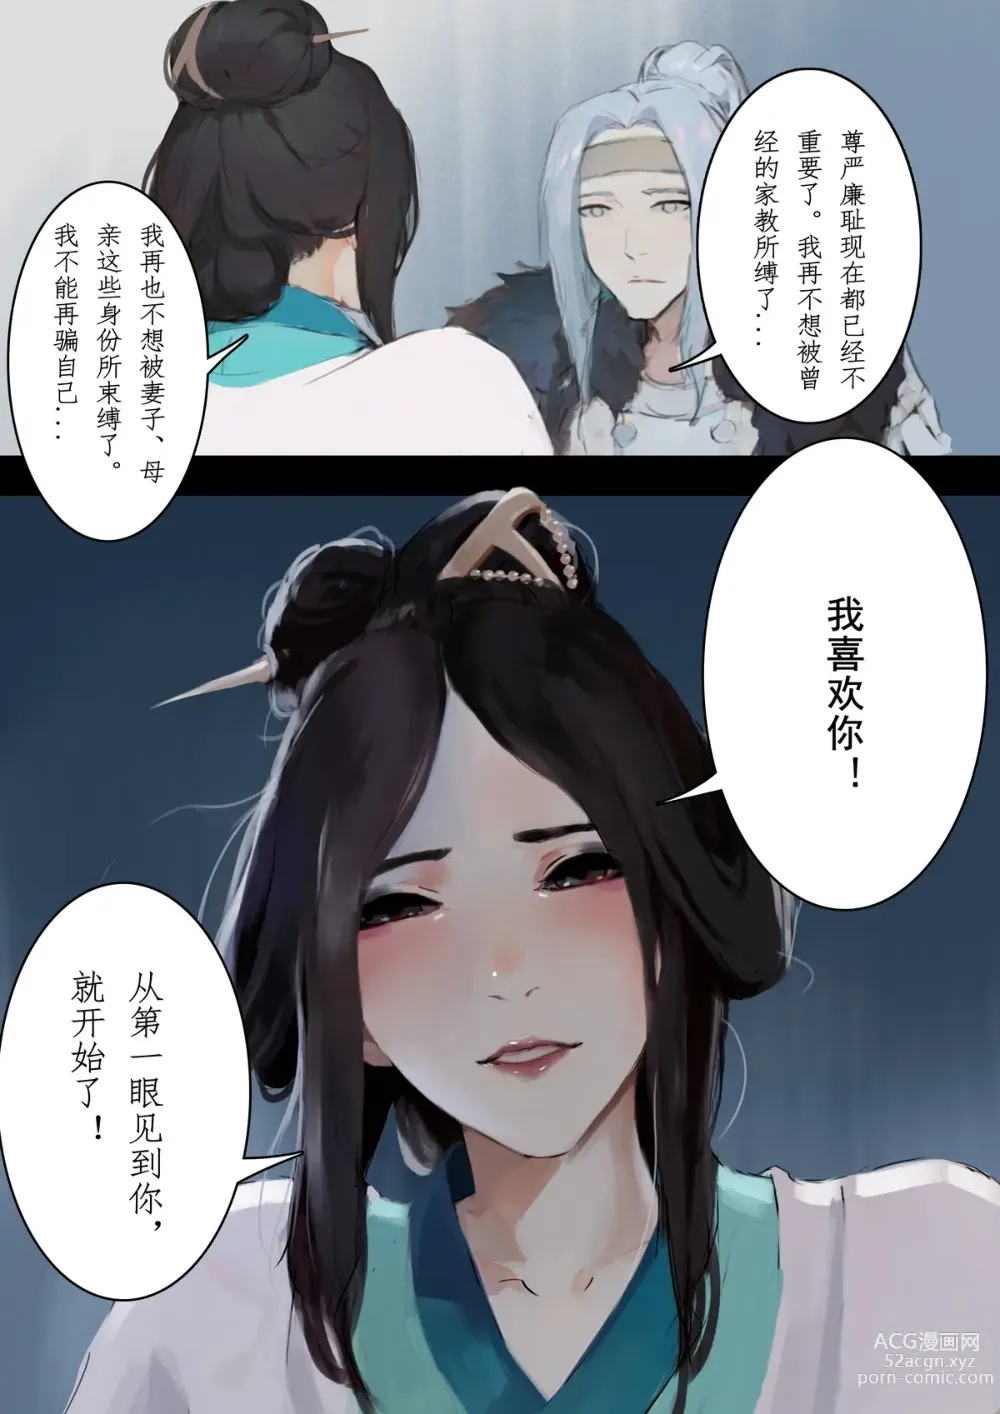 Page 33 of doujinshi 砂中莲